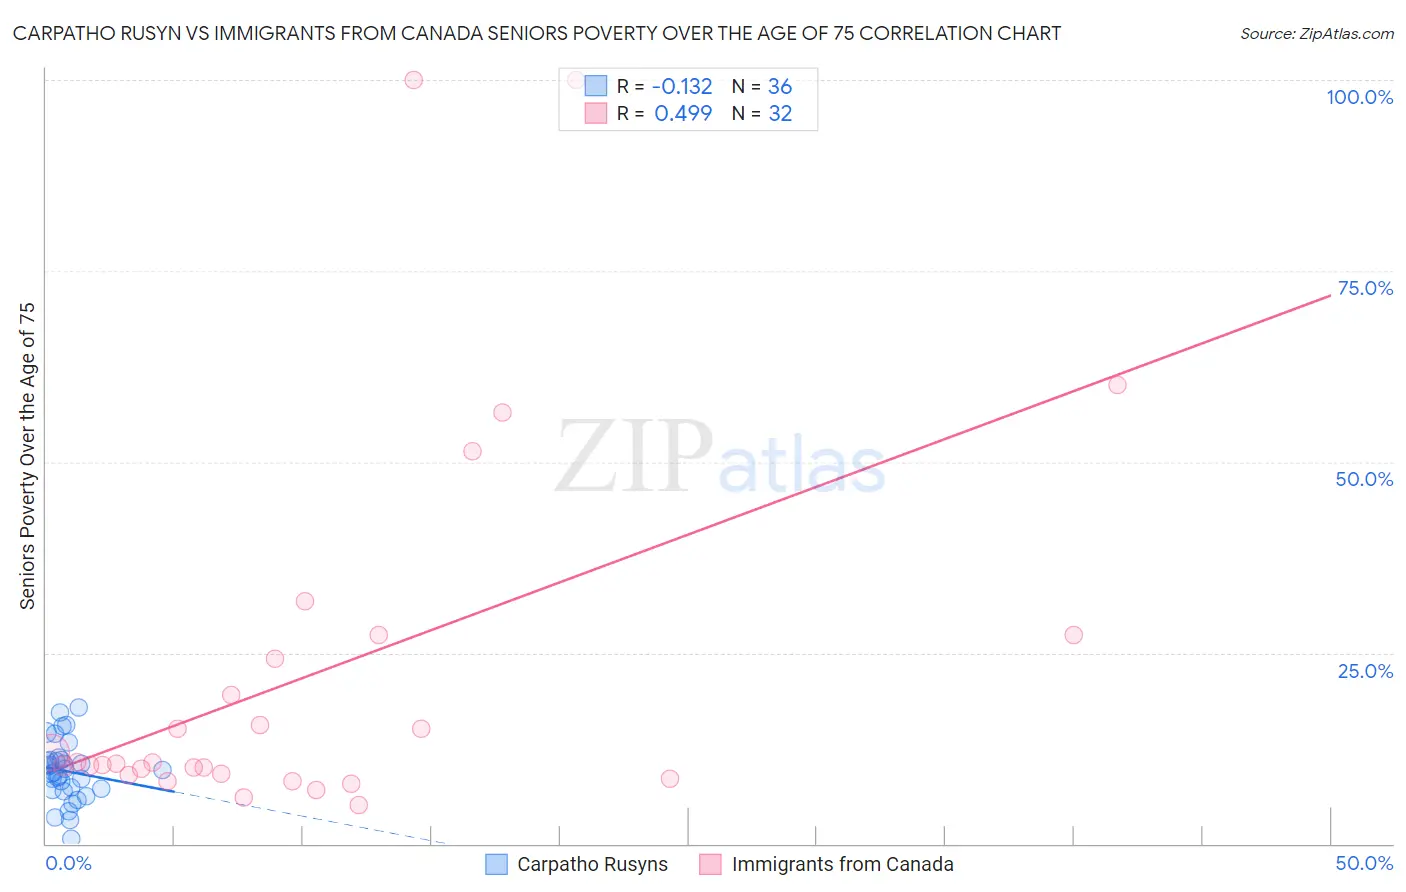 Carpatho Rusyn vs Immigrants from Canada Seniors Poverty Over the Age of 75